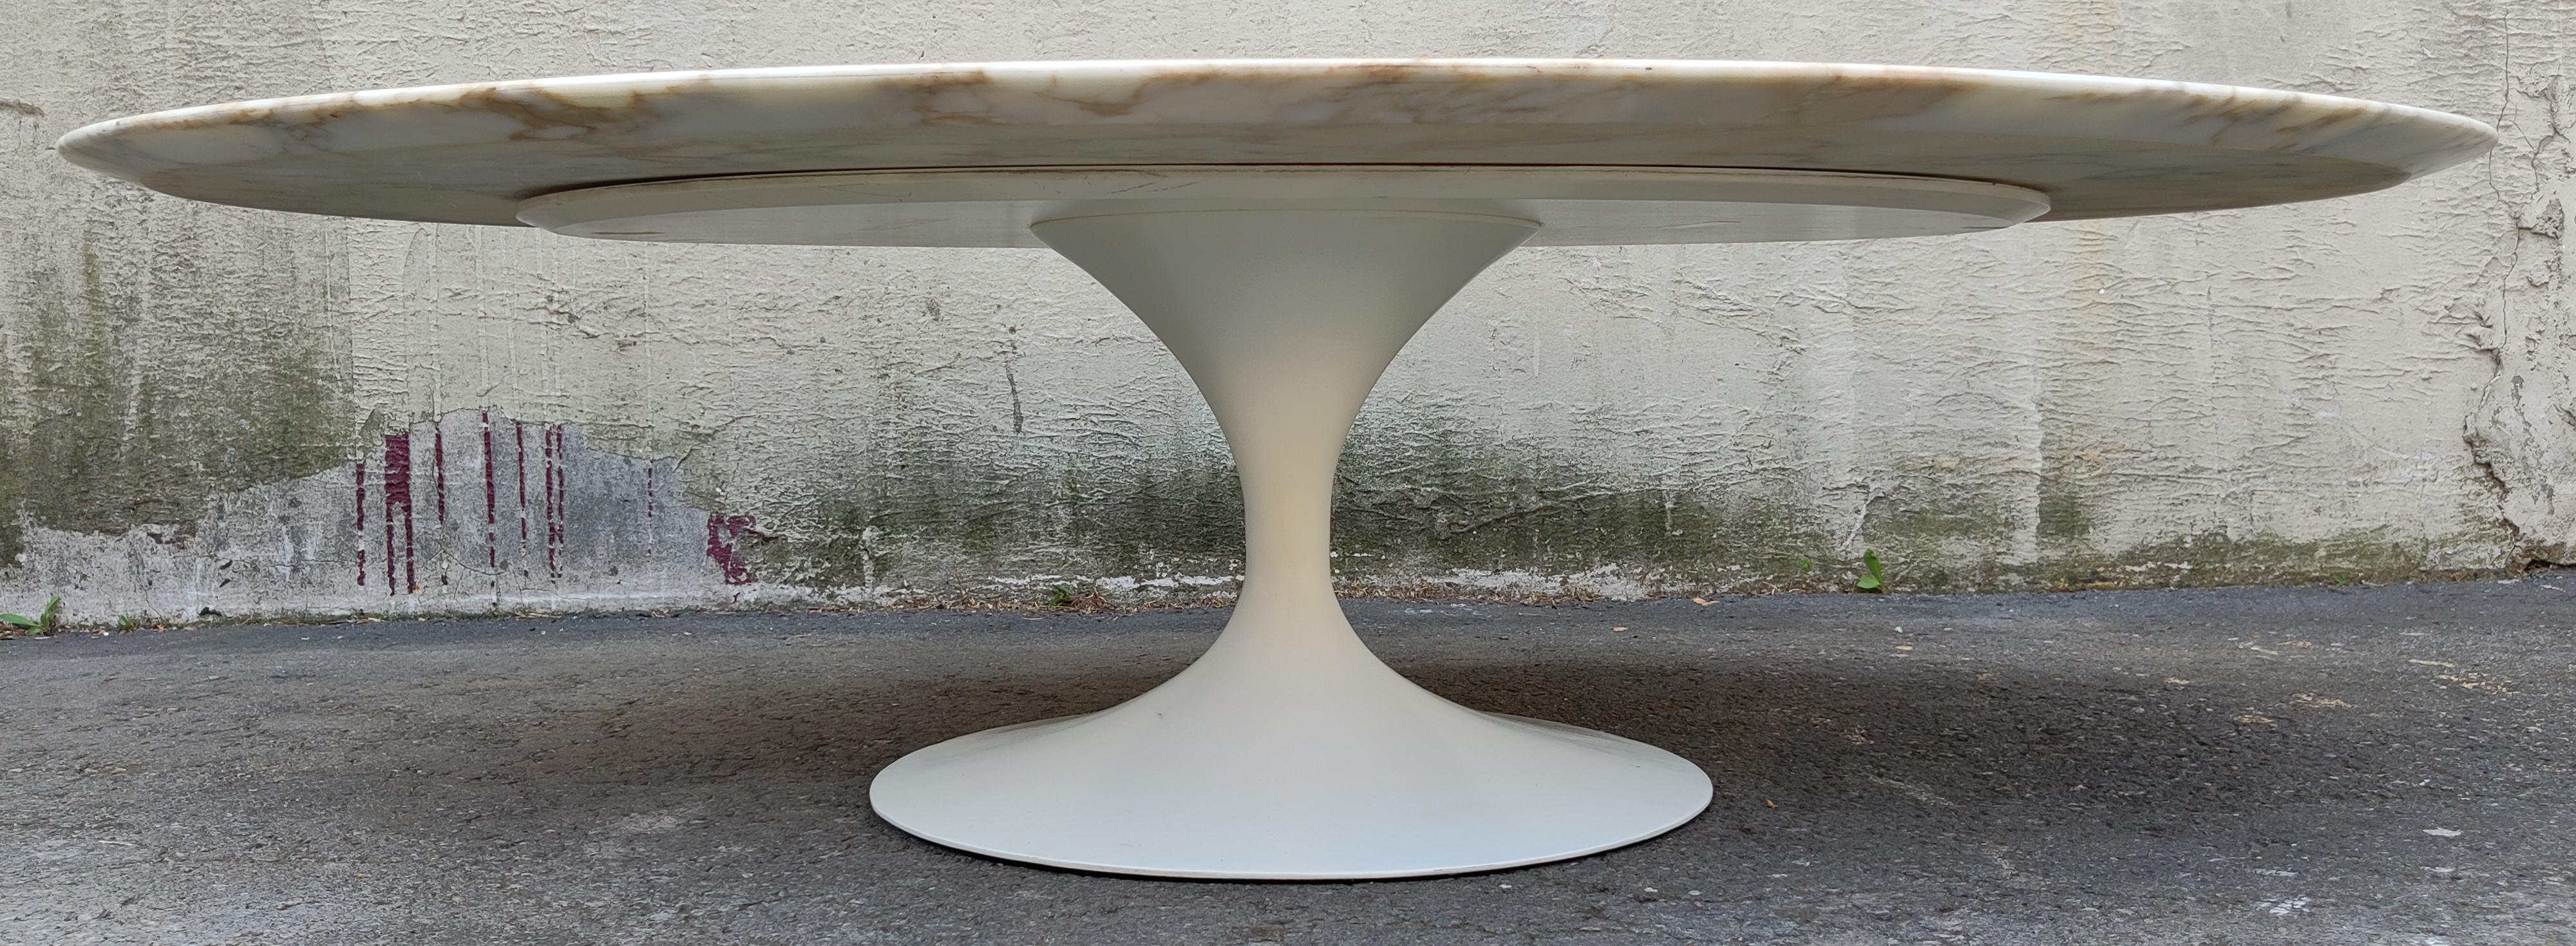 Originally designed by Eero Saarinen, this table was manufactured in the 1960s by Knoll International for resale in the heart of New York City. Being an early model, this specification is rare for its time, a white enameled cast-iron base and the